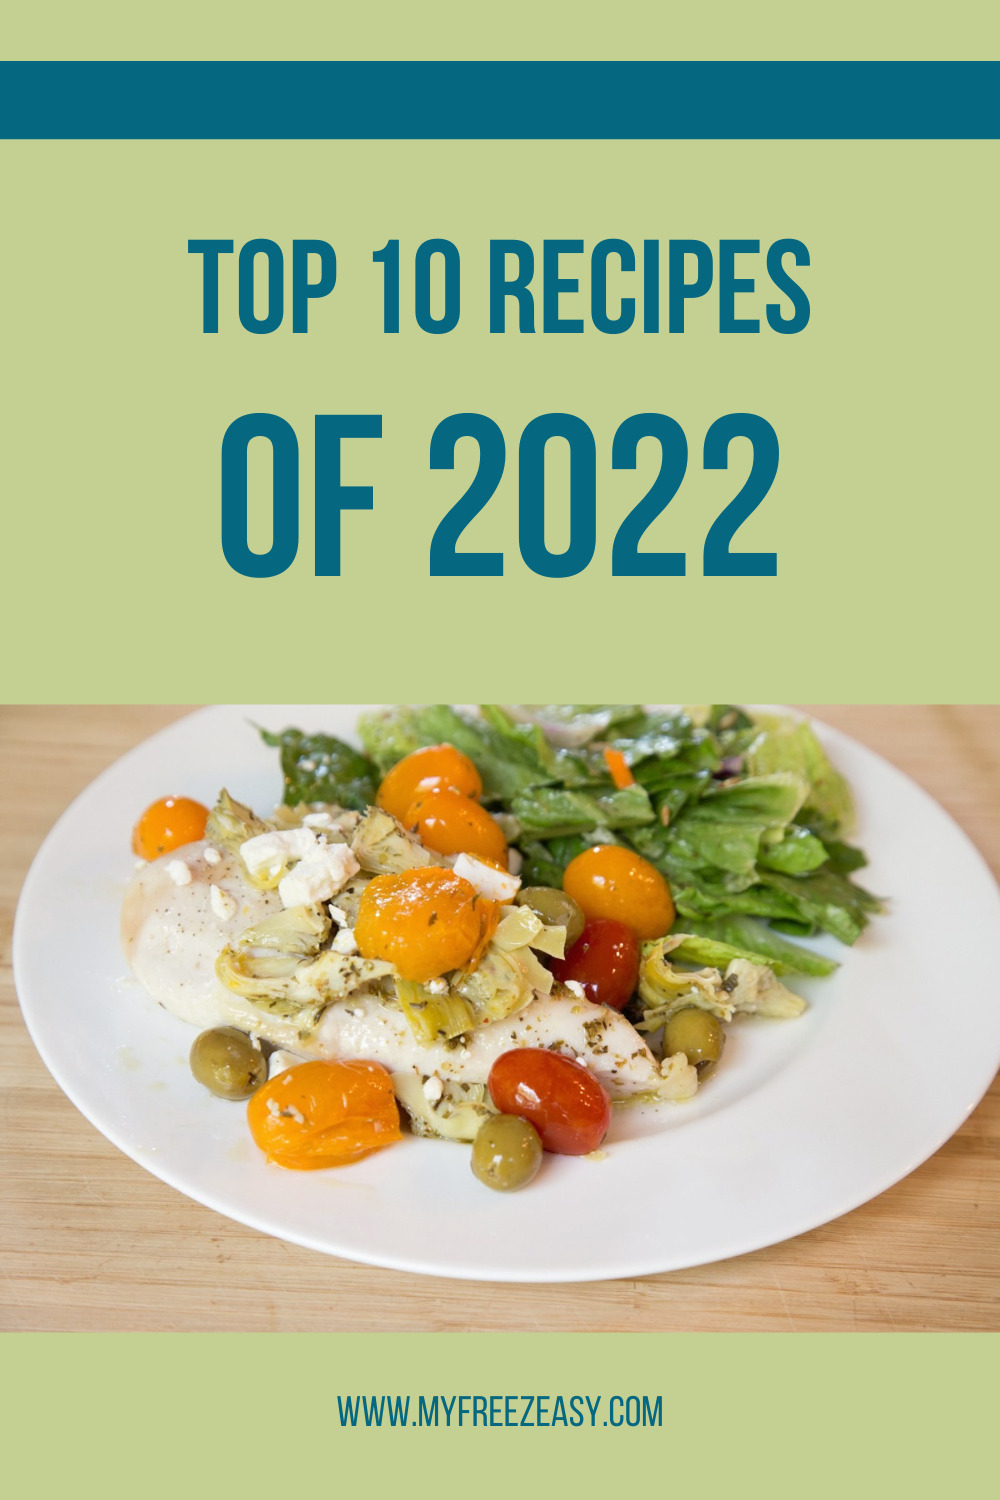 top 10 recipes of 2022 from myfreezeasy